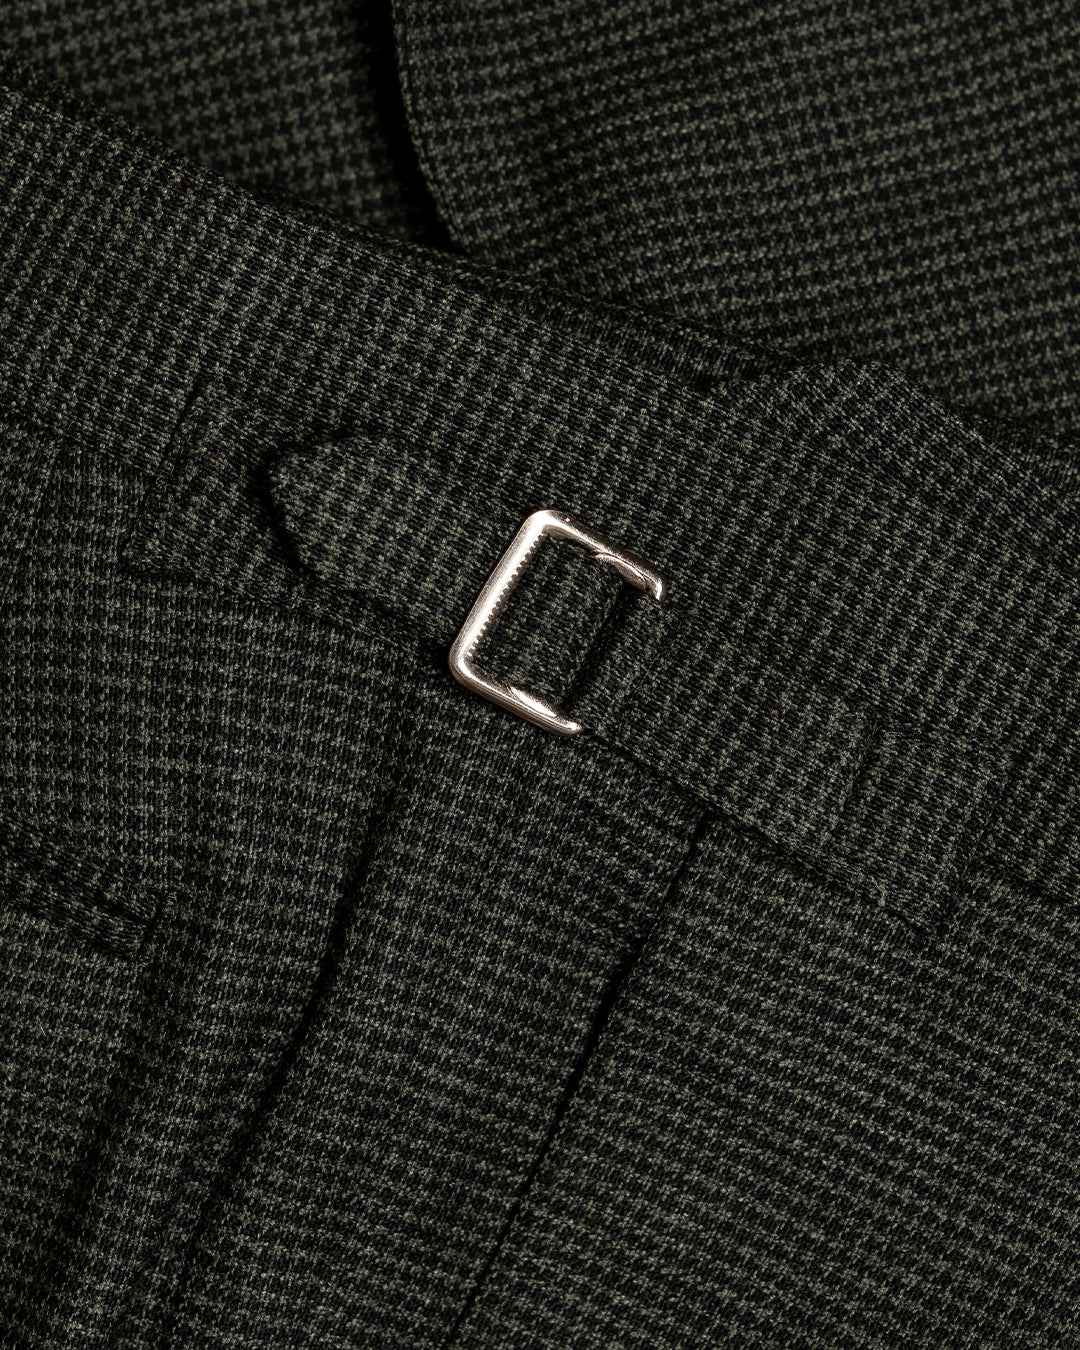 Ring Jacket Green Houndstooth Suit